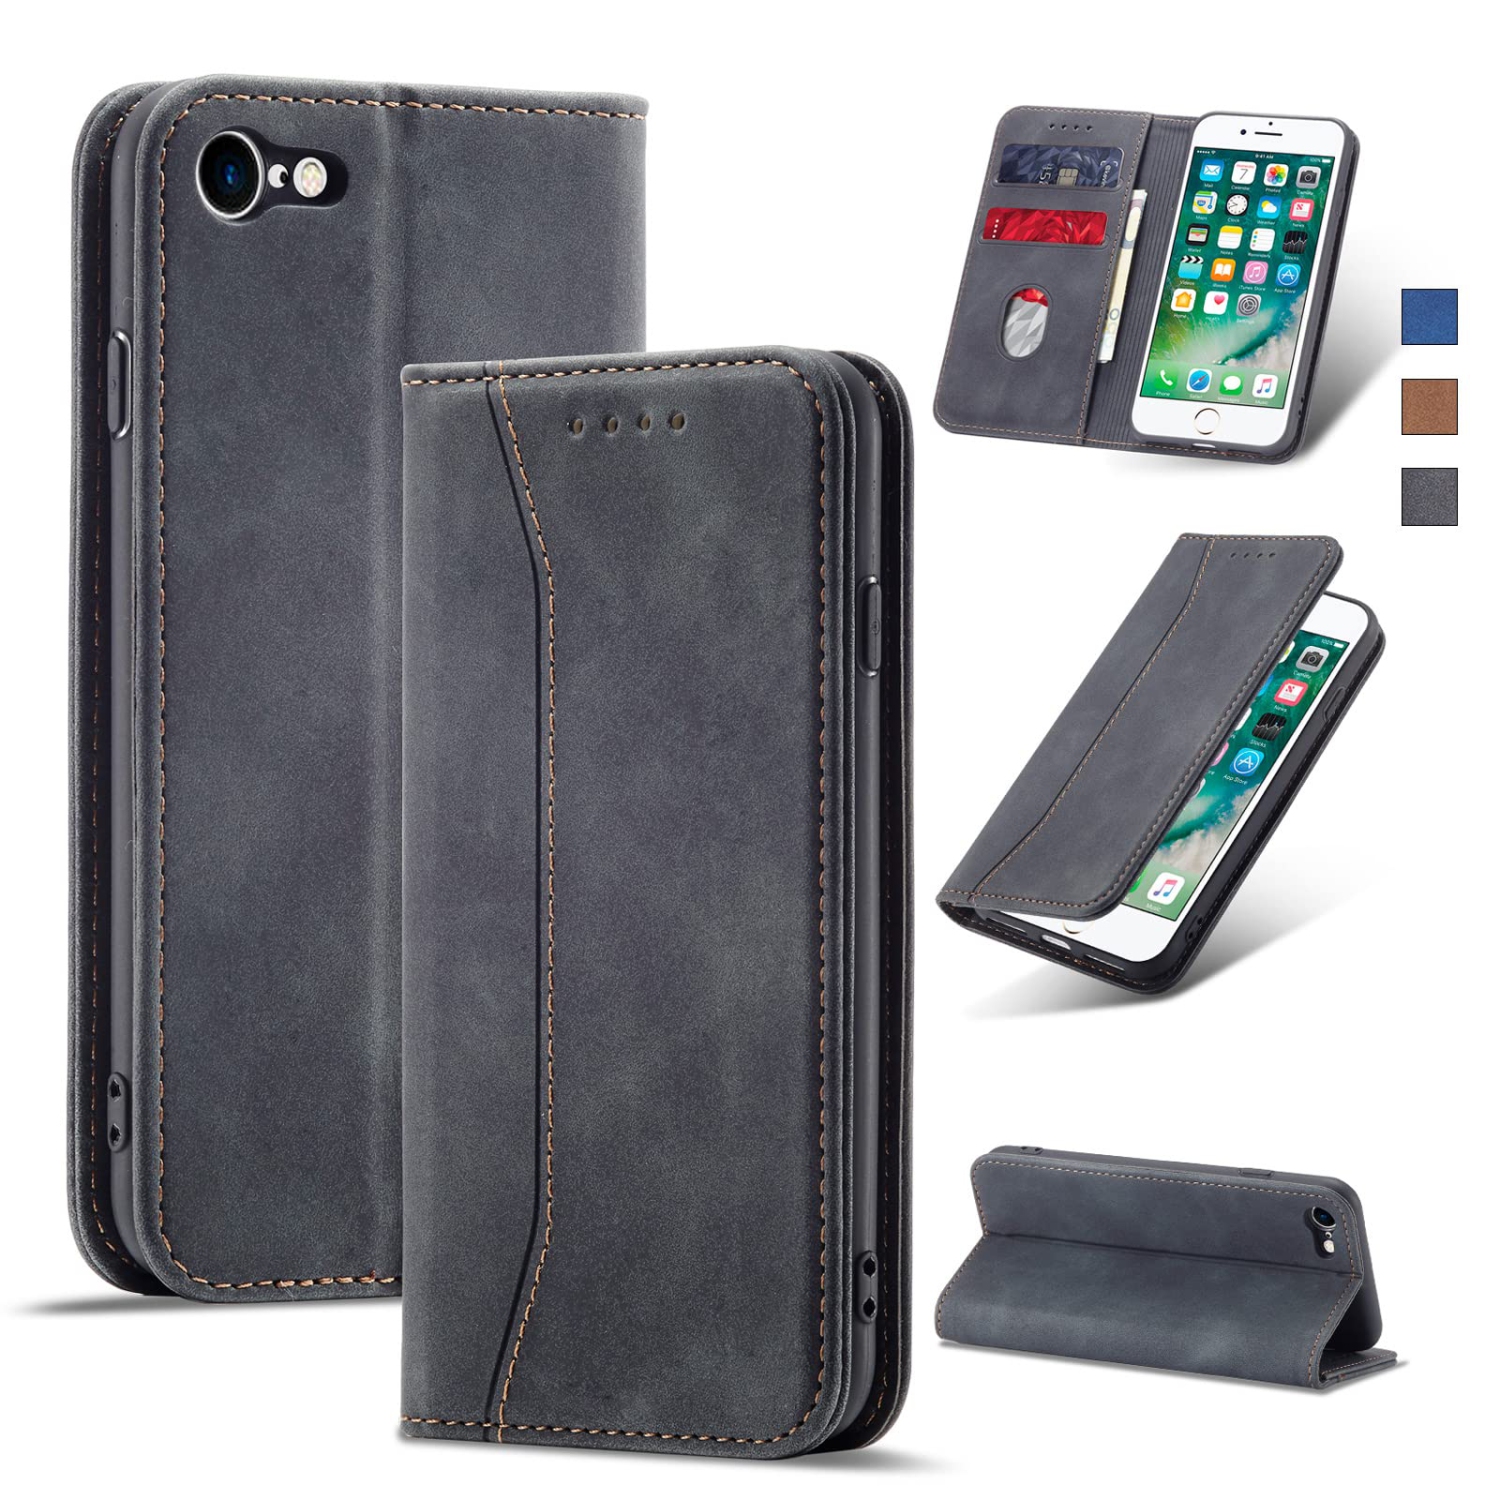 Jasonyu Wallet Case for iPhone SE 2022/2020 and iPhone 8/7, PU Leather Cover with Stand, Magnetic Folio Flip, TPU Shockproof Interior Case and Card Holder Slots, Black